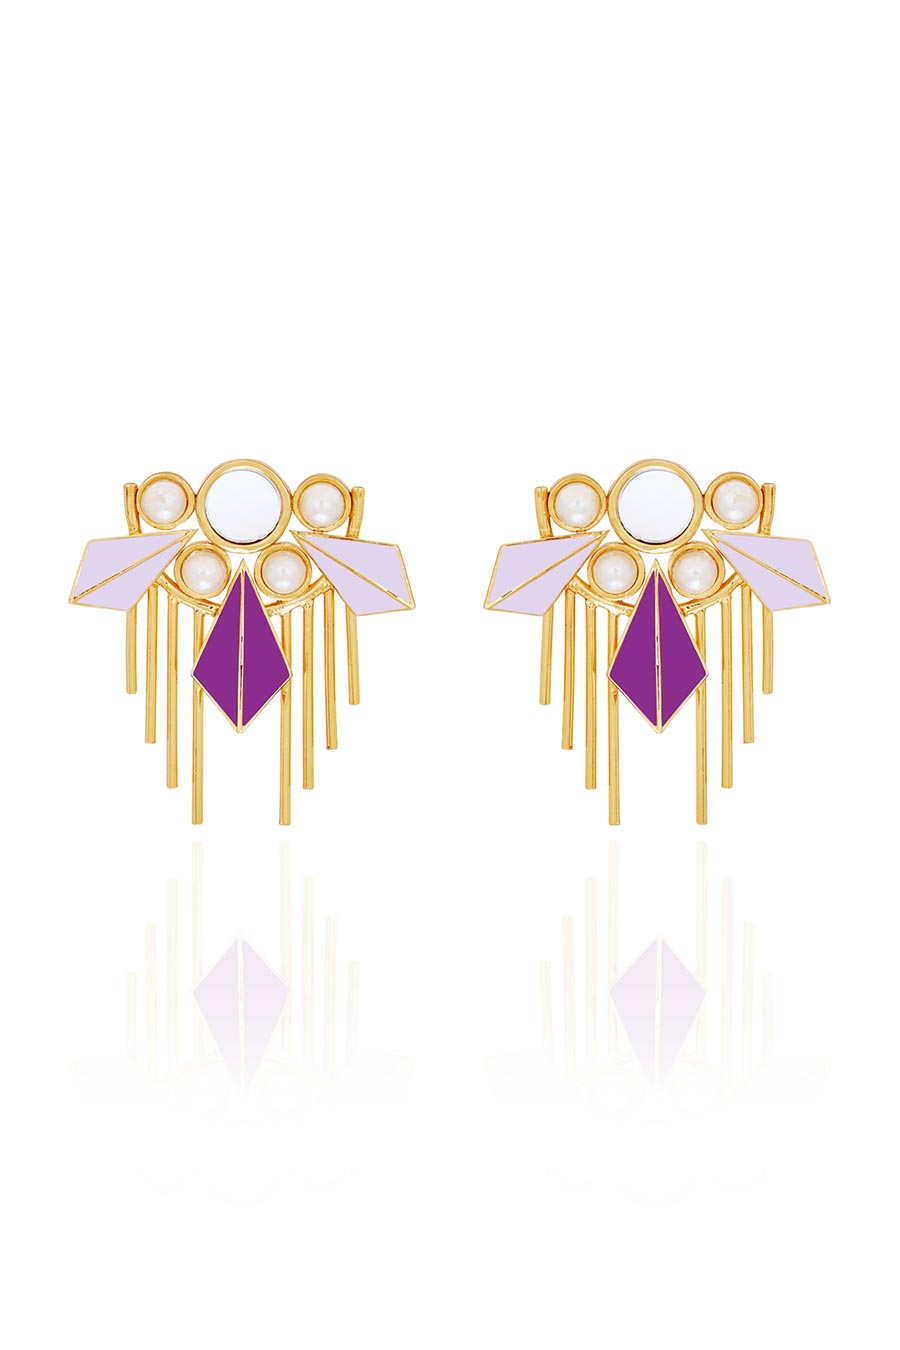 Stellar Dazzlers Gold Plated Earrings